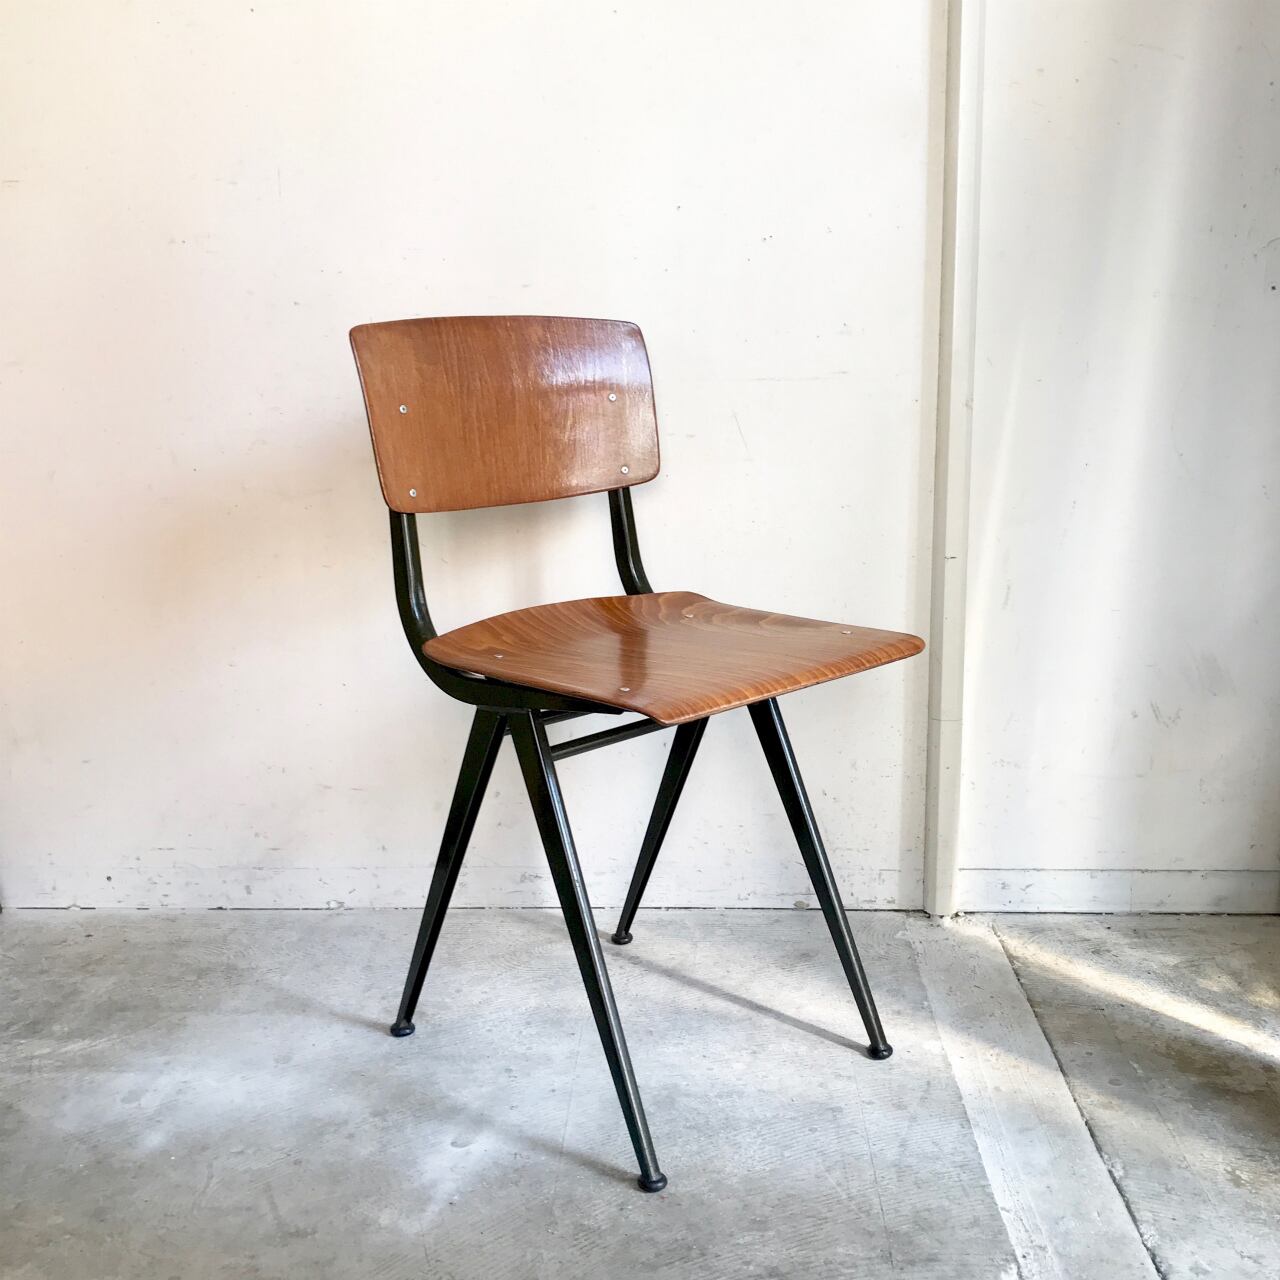 "Marko" Compass Leg Industrial Chair 1960's オランダ A | Couscous Furniture  powered by BASE